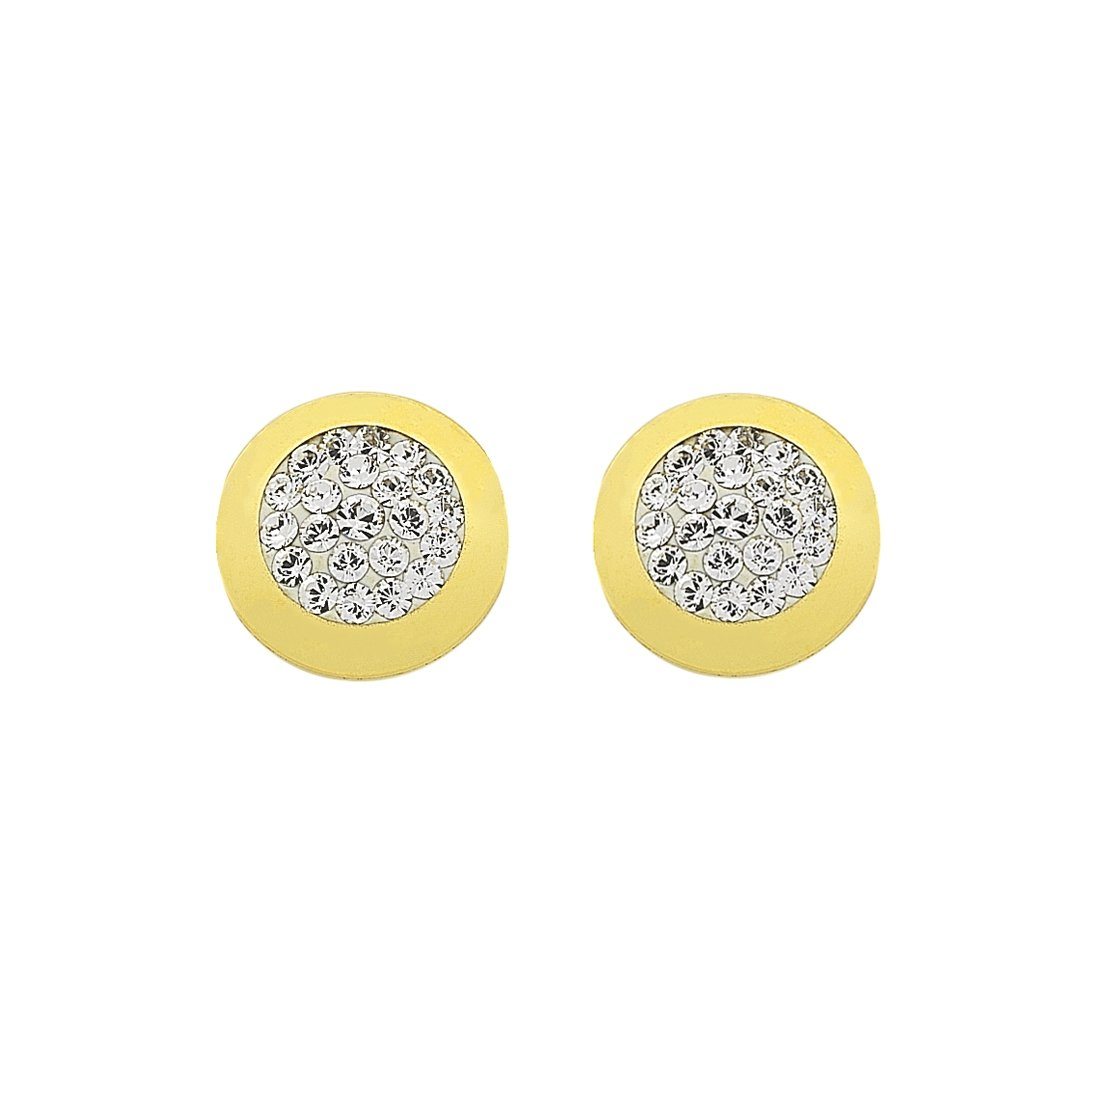 9ct Yellow Gold Silver Infused Crystal Pave Stud Earrings Earrings Bevilles 